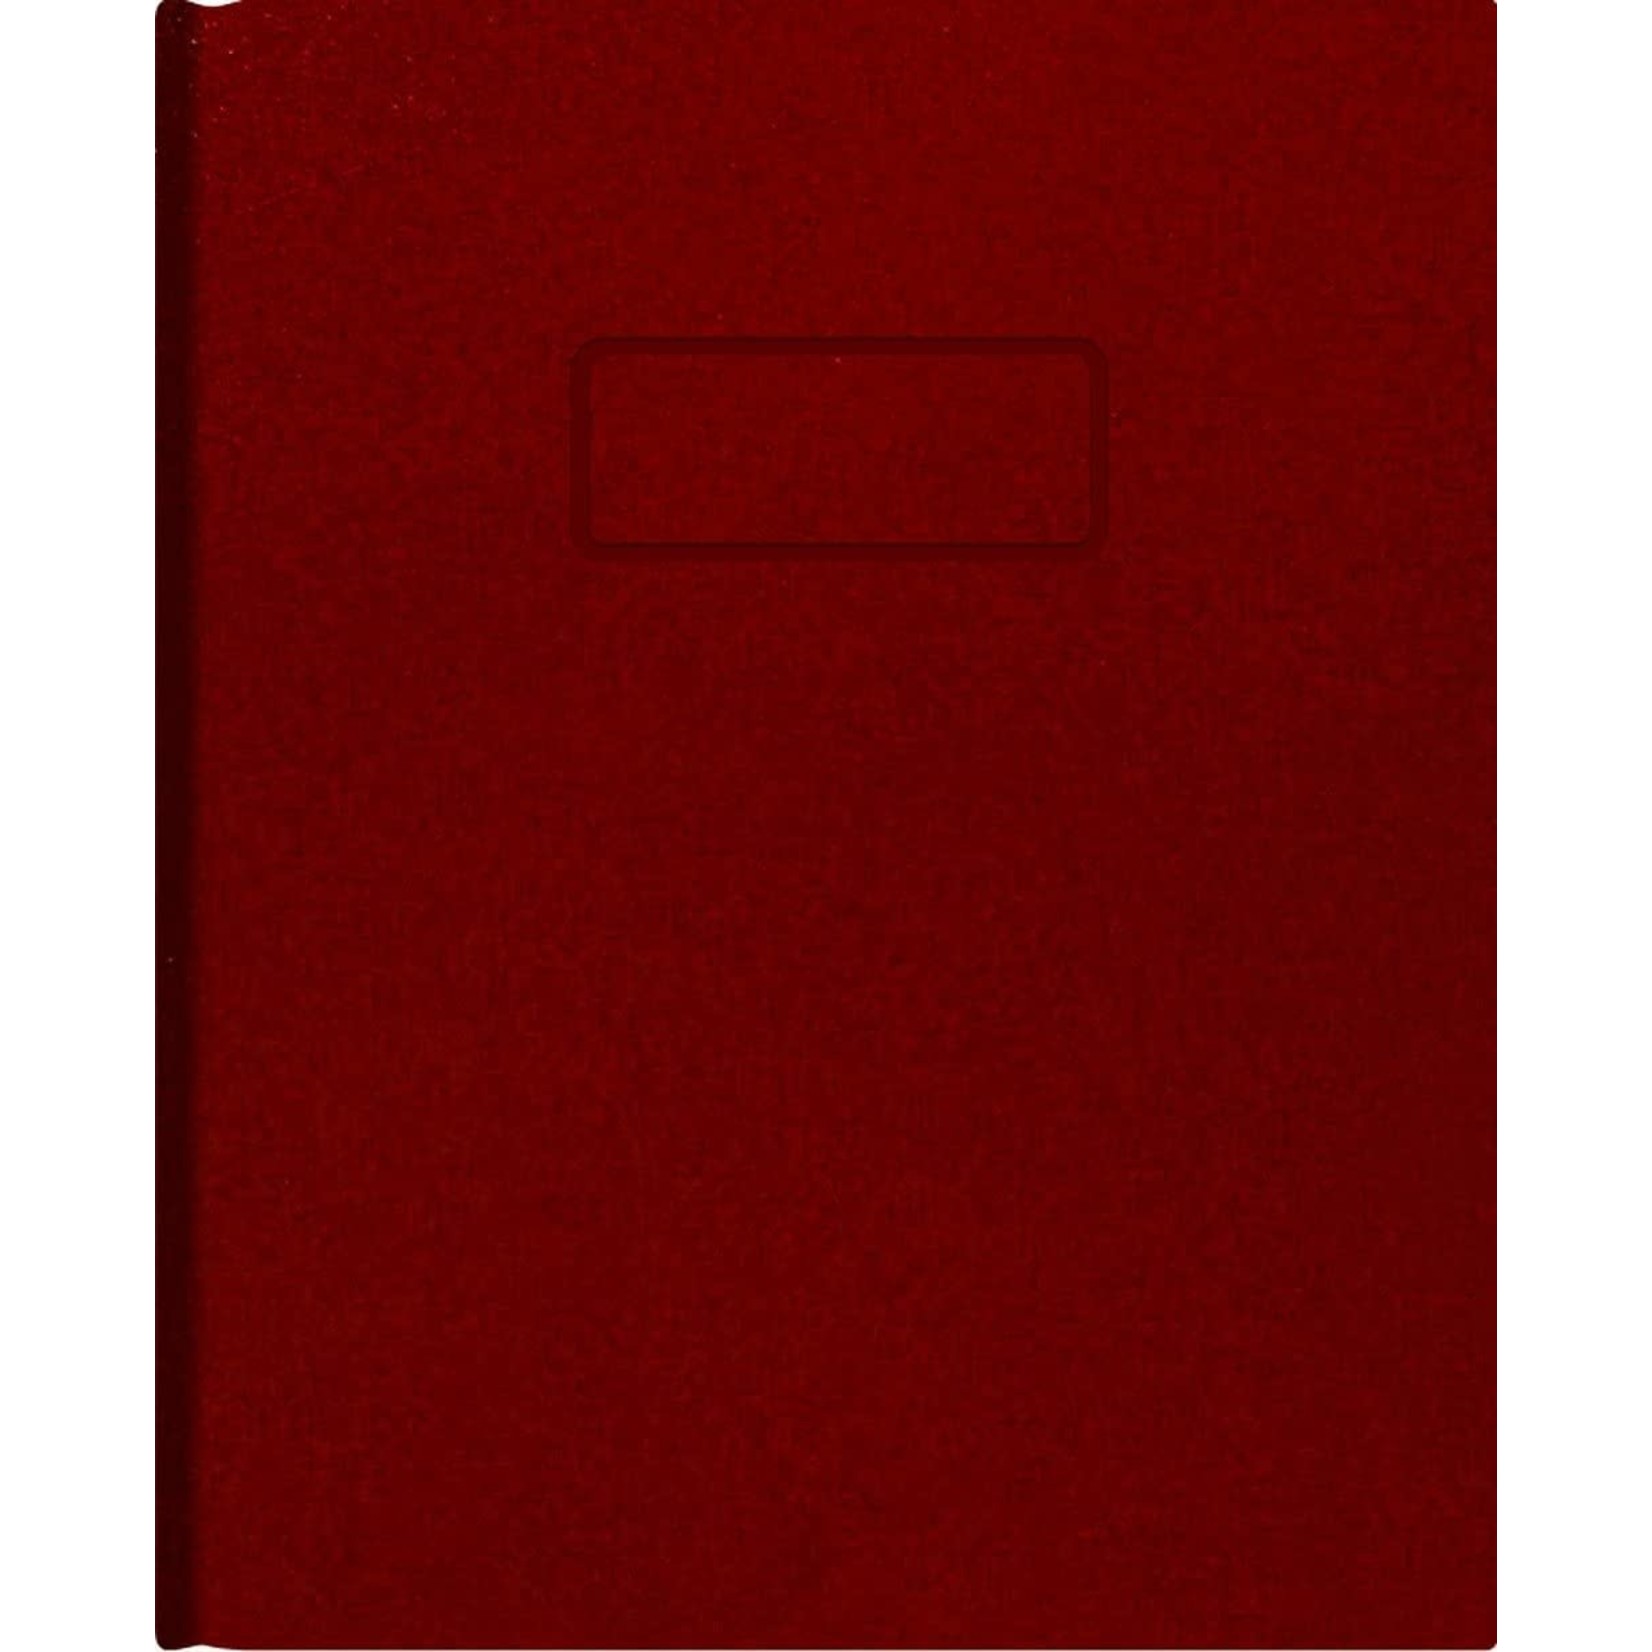 Blueline Hard Cover Notebook  192pgs- Red